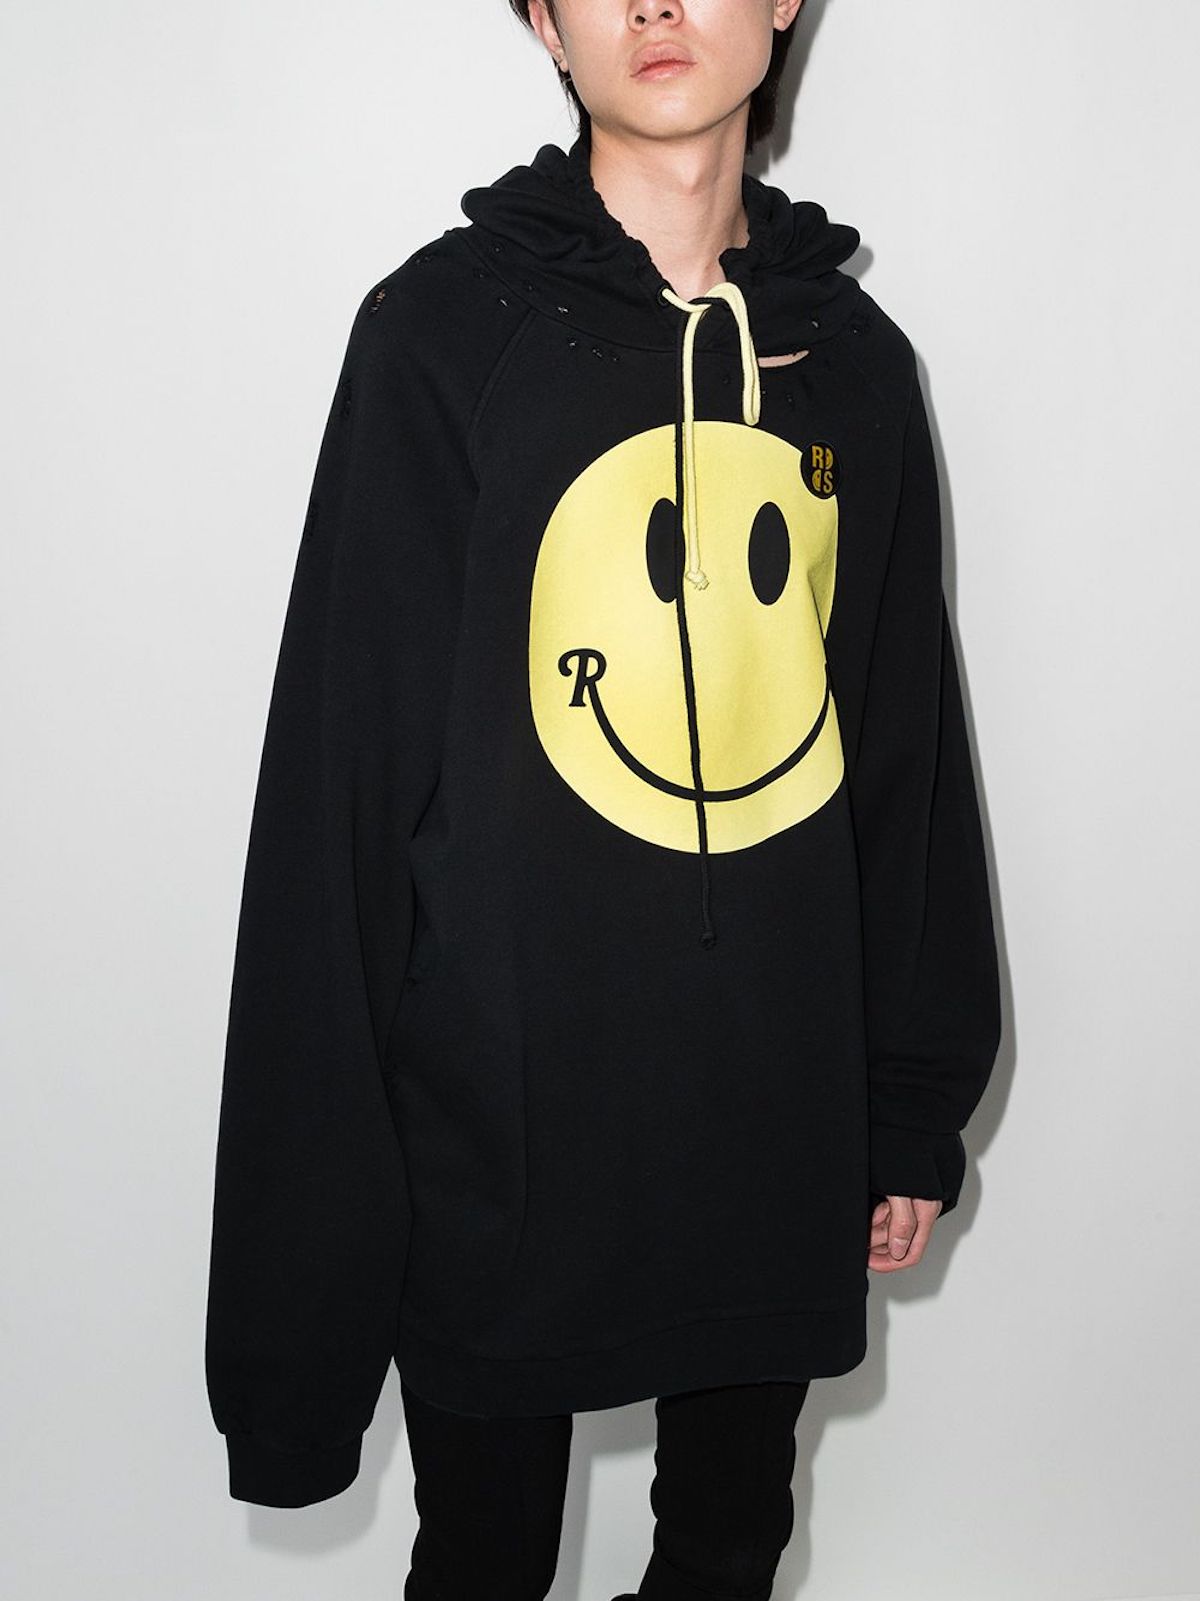 Raf Simons & Smiley Come Together For New Capsule – PAUSE Online